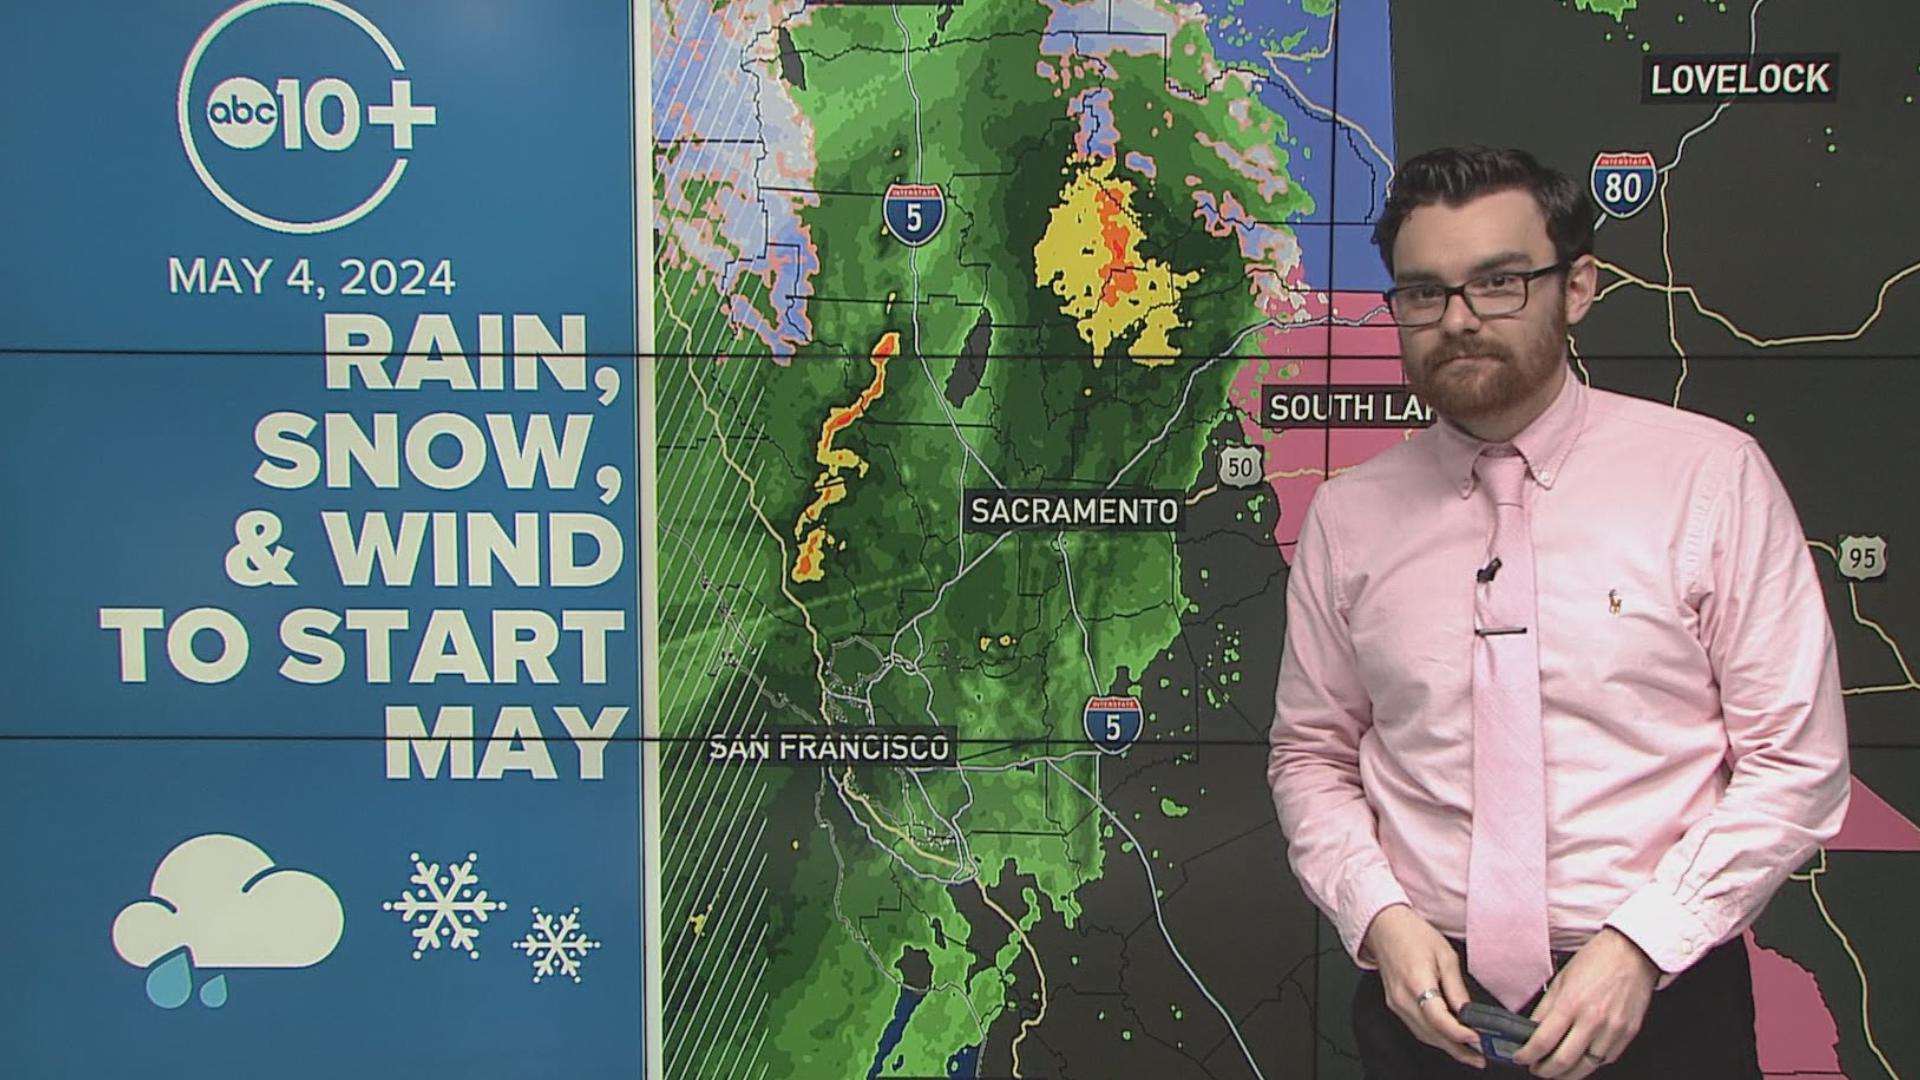 ABC10 meteorologist Brenden Mincheff with an extended look at the active weather forecast from valley rain to Sierra snow, plus a look at snowpack and reservoirs.